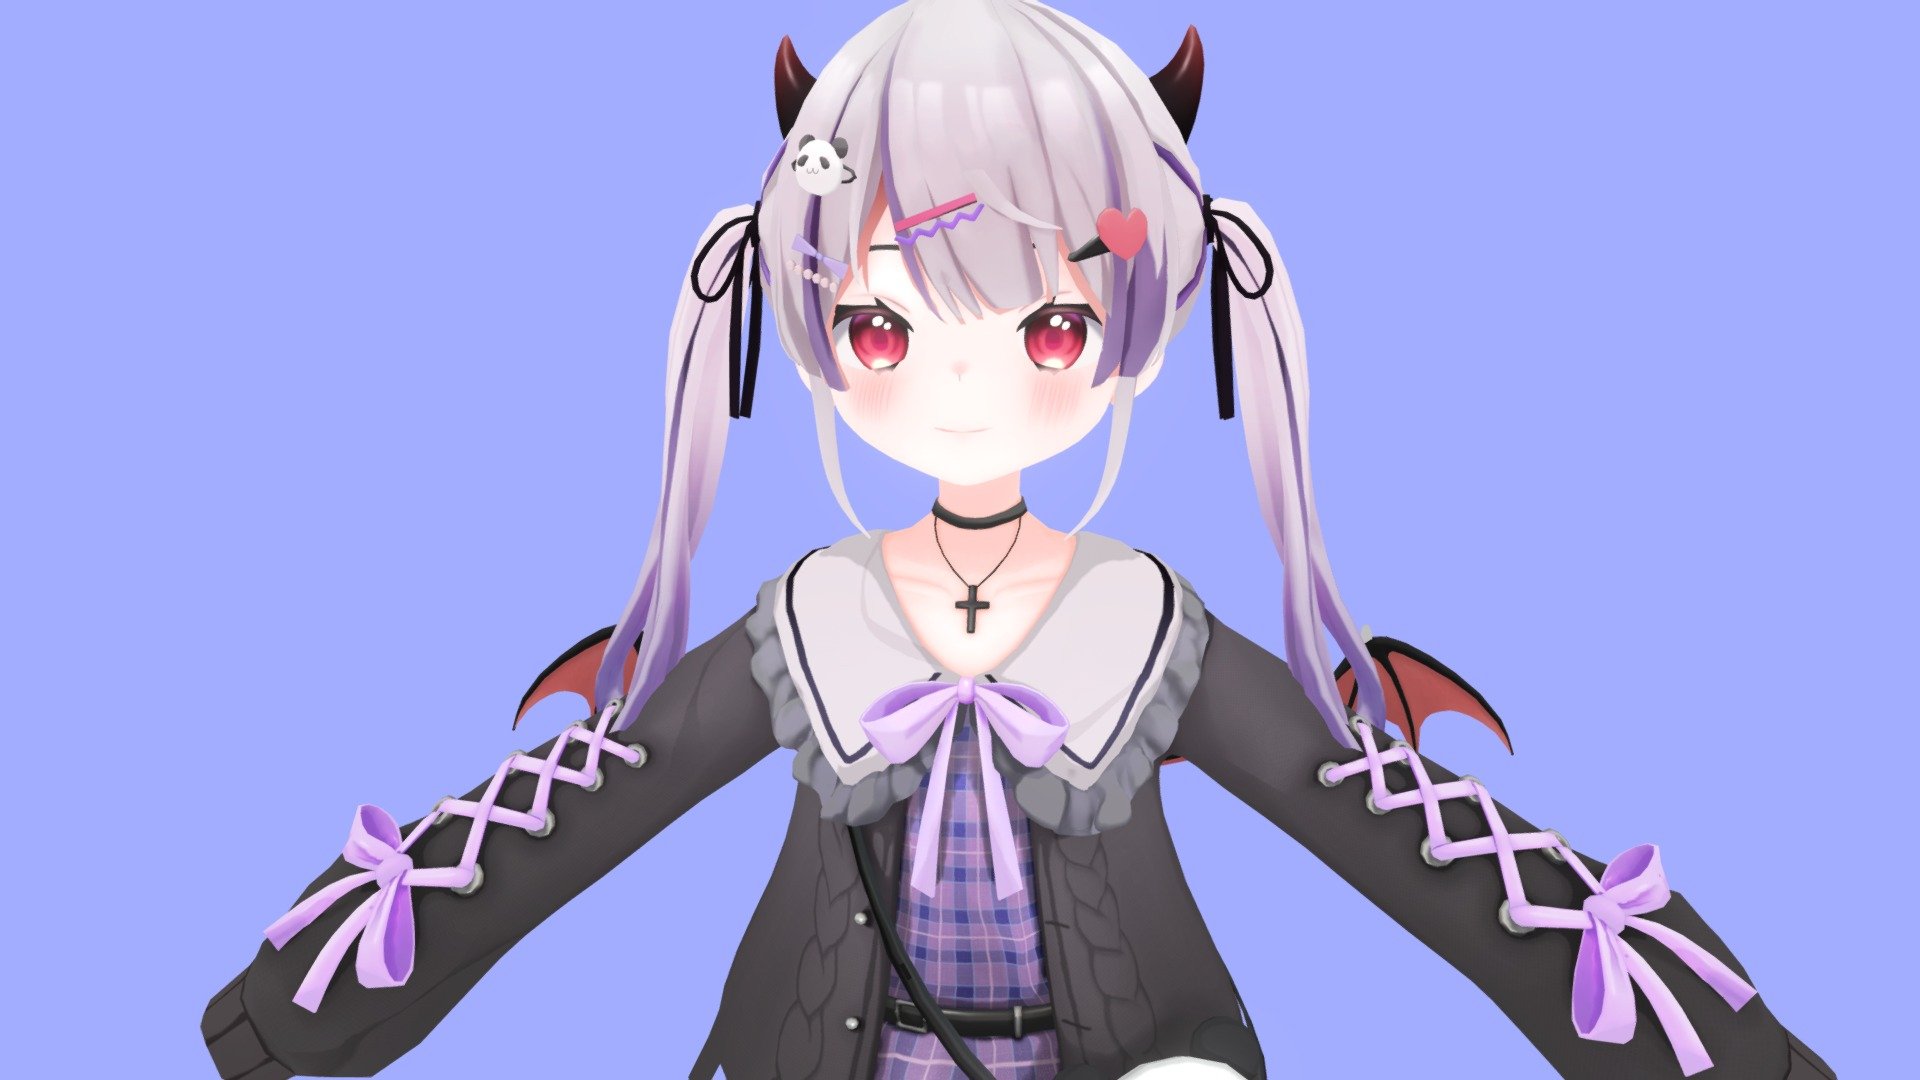 ( Support me by Subscribe + turn on notification ) and you will redirect to download page.
Download Link &lsquo;Full Body Model ) : https://letsboost.net/KVAmnp

Done By :  namekuji1337 
3D anime Character based on Japanese anime : this character is made using blender 2.92 software, it is a 3d anime character that is ready to be used in games, vtubing, vrchat and other games and usages. Anime-Style, VRChat Avatar, VRChat Ready, Game Ready

Features:

• Rigged

• Unwrapped.

• Body, hair and clothings .

• Textured..

• Bones Made in blender 2.92

TAGS :

sculpture,statue,figure,nude,woman,sexy,body,game,girl,female,erotic,anime,anatomy,character,fantasy,movie,print,sculptures,bunny asian cat,asian girl,anime girl,model 3d,anime rigged,japanese anime,Japanese girl,geisha,kimono,kemono girl,character rigged,female rigged,miku,cartoon character,woman character,anime base,anime female,kawaii,cat head,cat girl, ,body,beauty,anime, beautiful,cartoon,character,face,person,face,hair,rigged,vrchat,unity,game, - 3D Anime Character girl for Blender C1 - Download Free 3D model by CGCOOL (@Youcef.Solo) 3d model